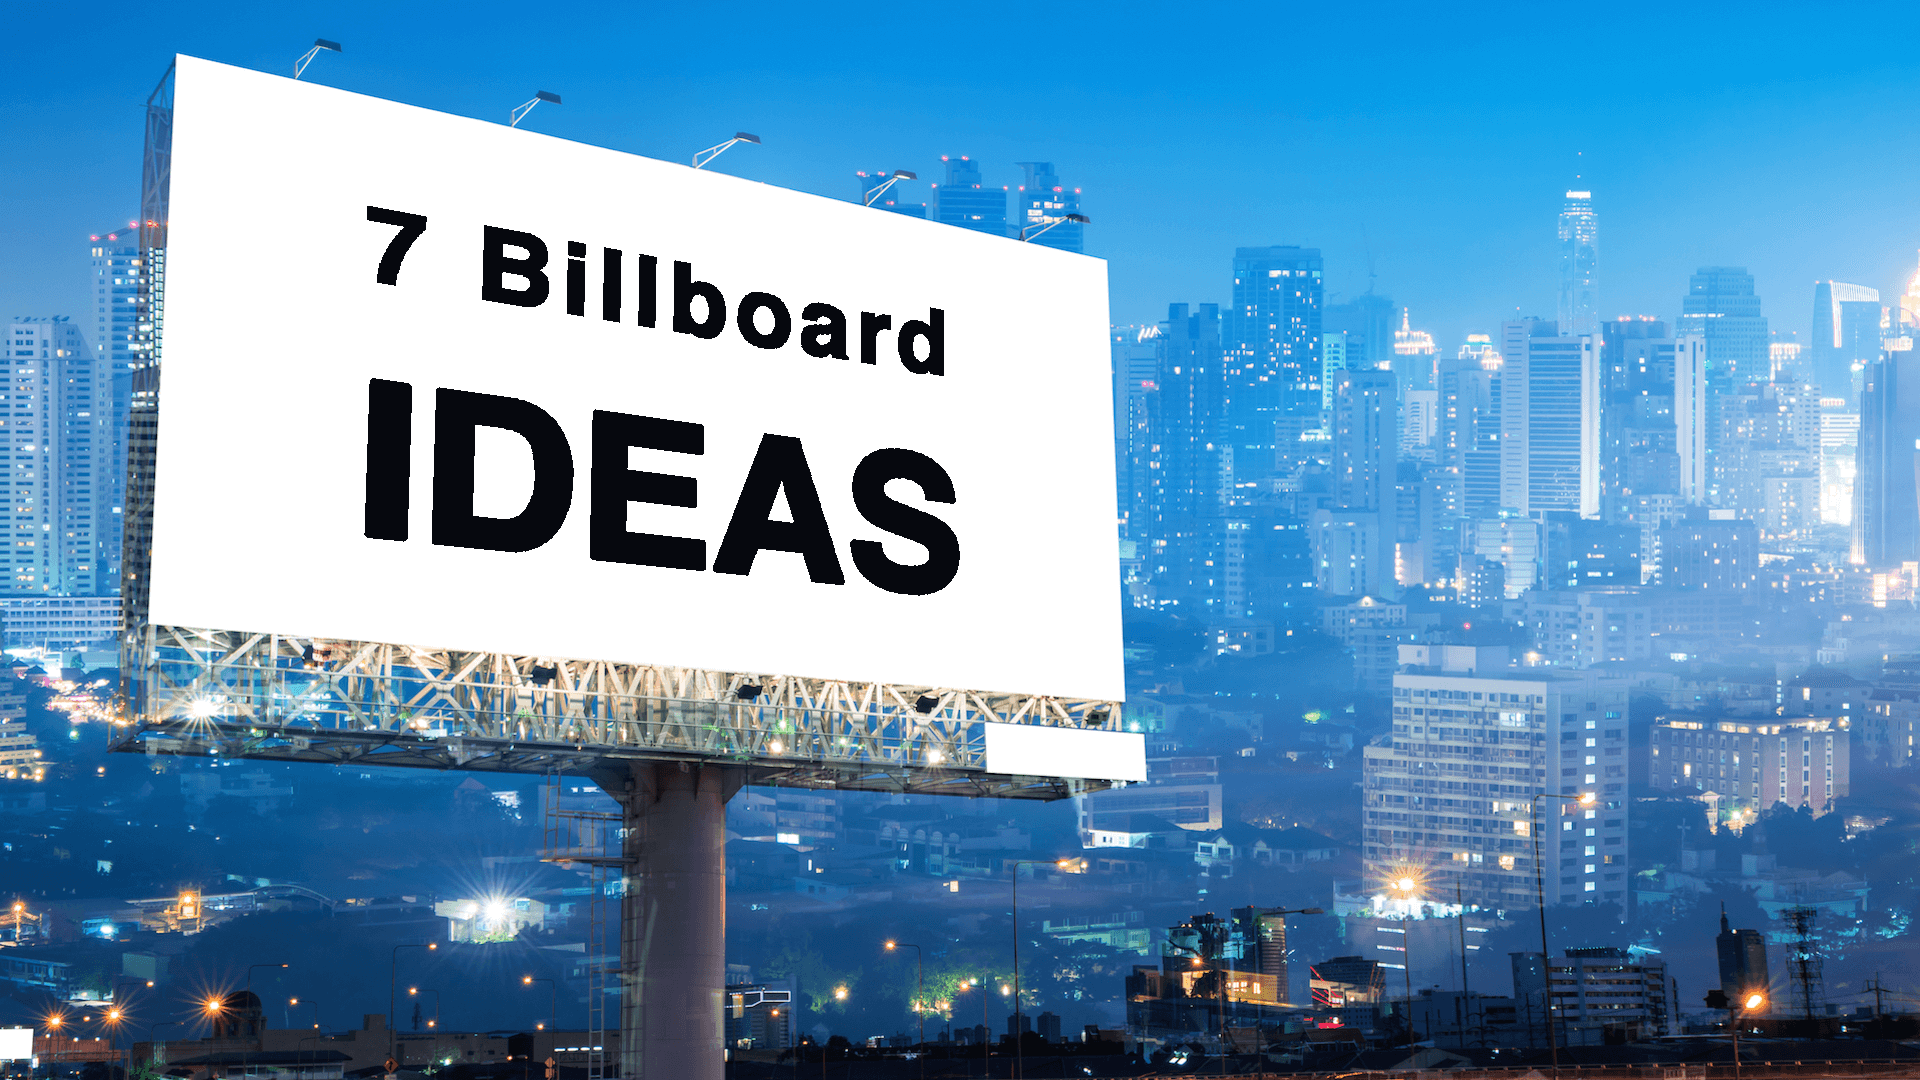 7 Awesome Billboard Ad Examples For Real Estate – Facebook Lead